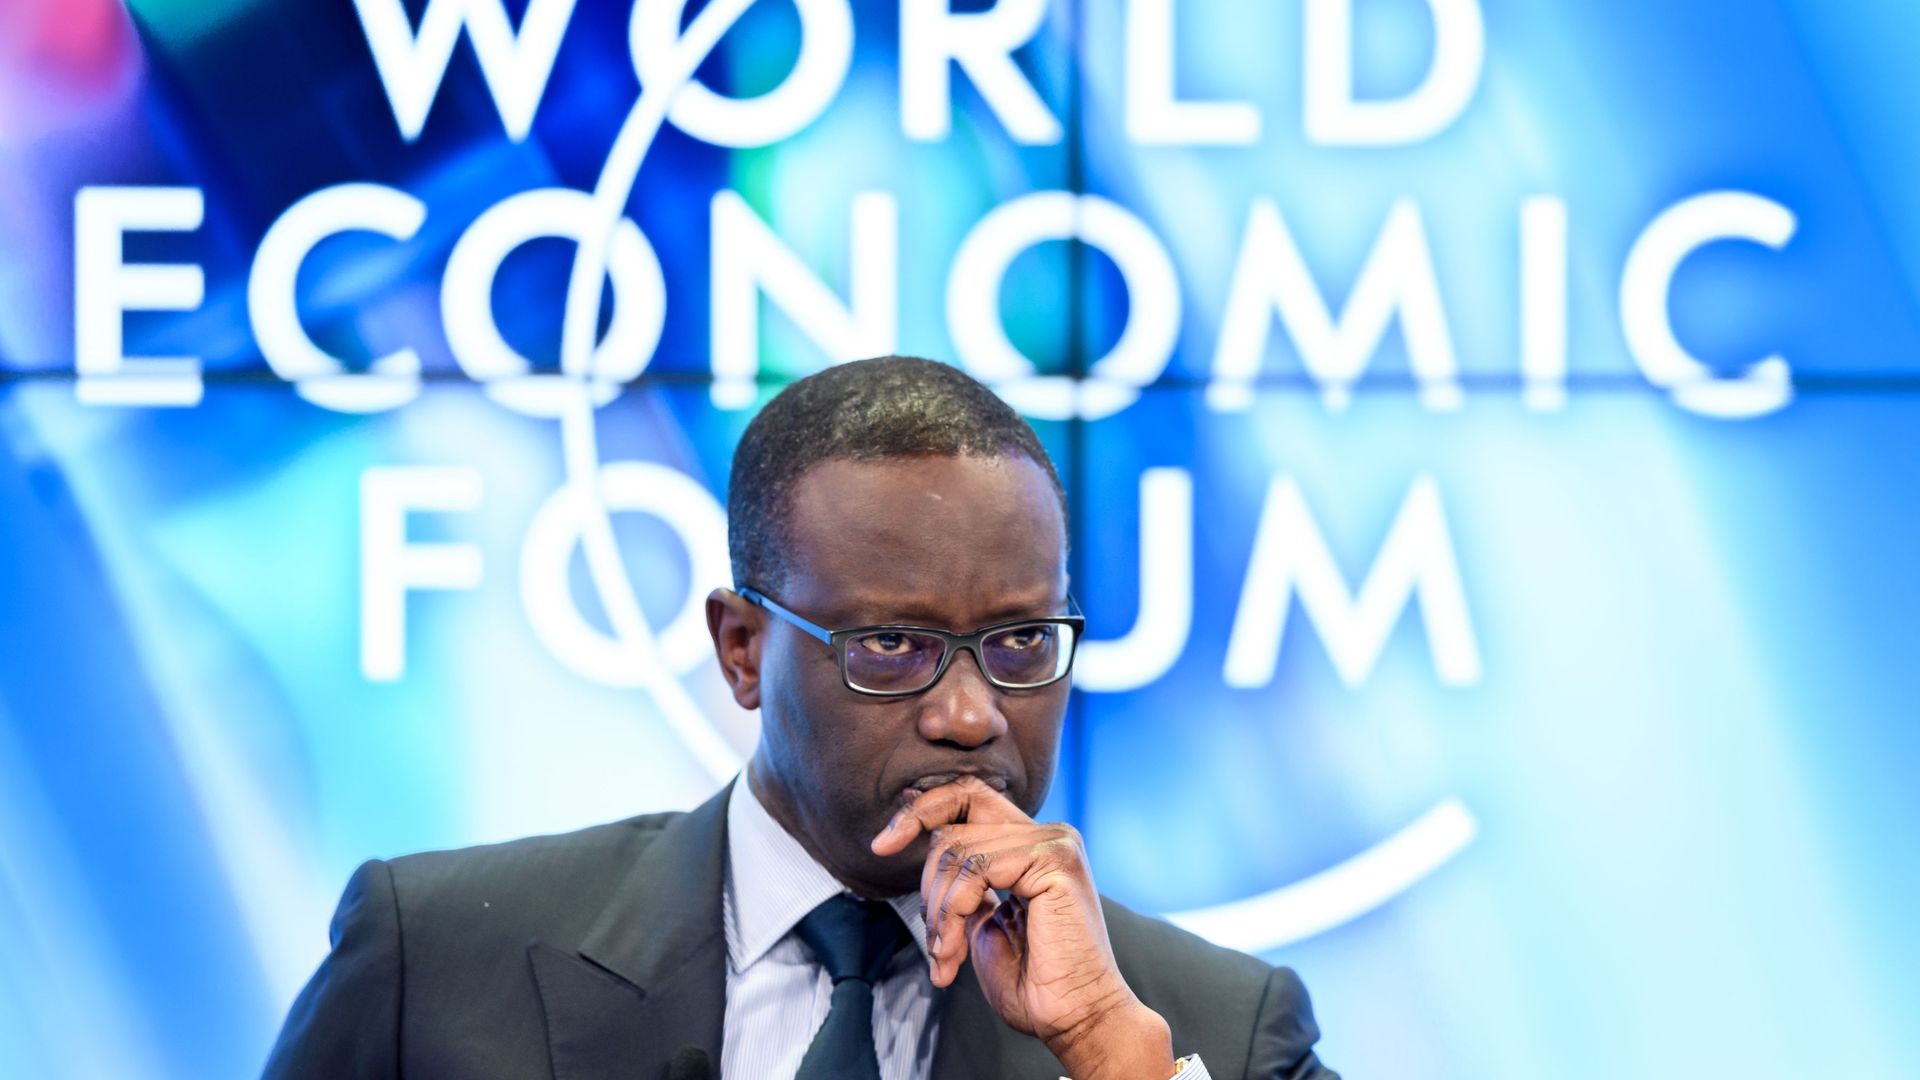 Credit Suisse CEO Tidjane Thiam attends a session on the opening day of the World Economic Forum 2018 annual meeting